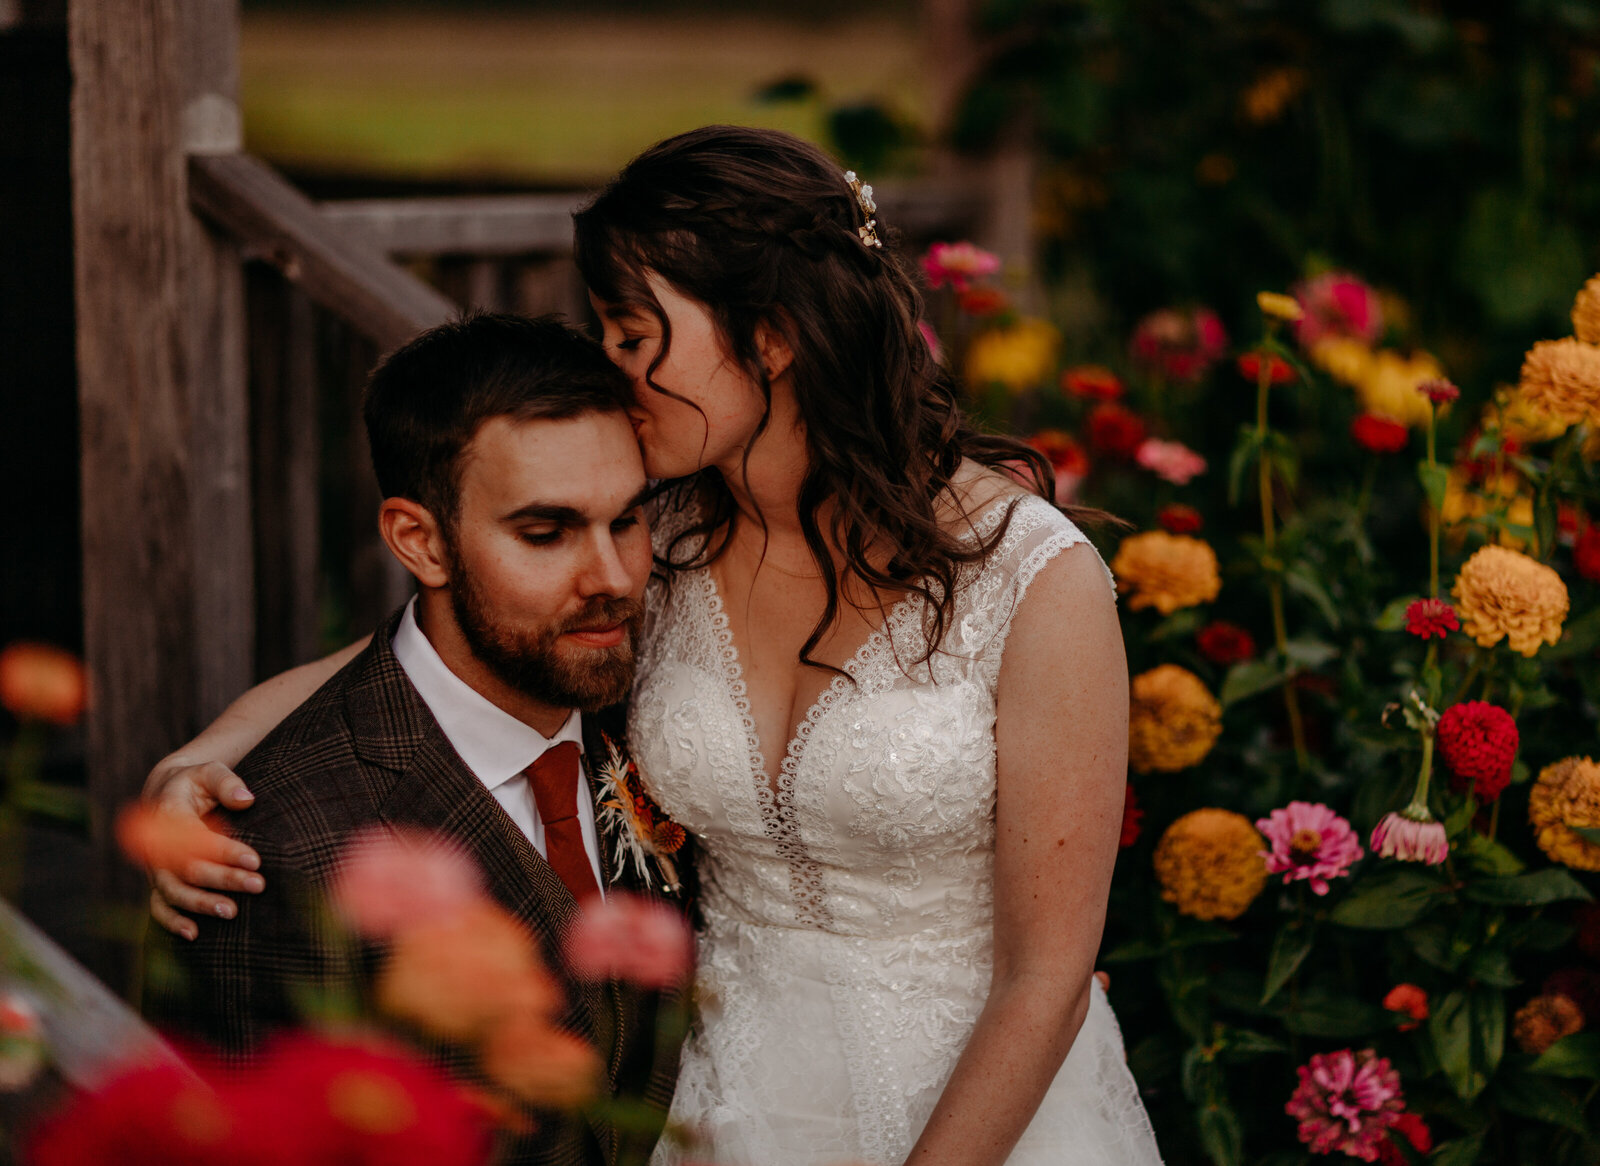 Fall wedding at The Saltbox Barn on Fir Island in Mount Vernon, WA. Couple in wedding attire sitting amongst flowers.